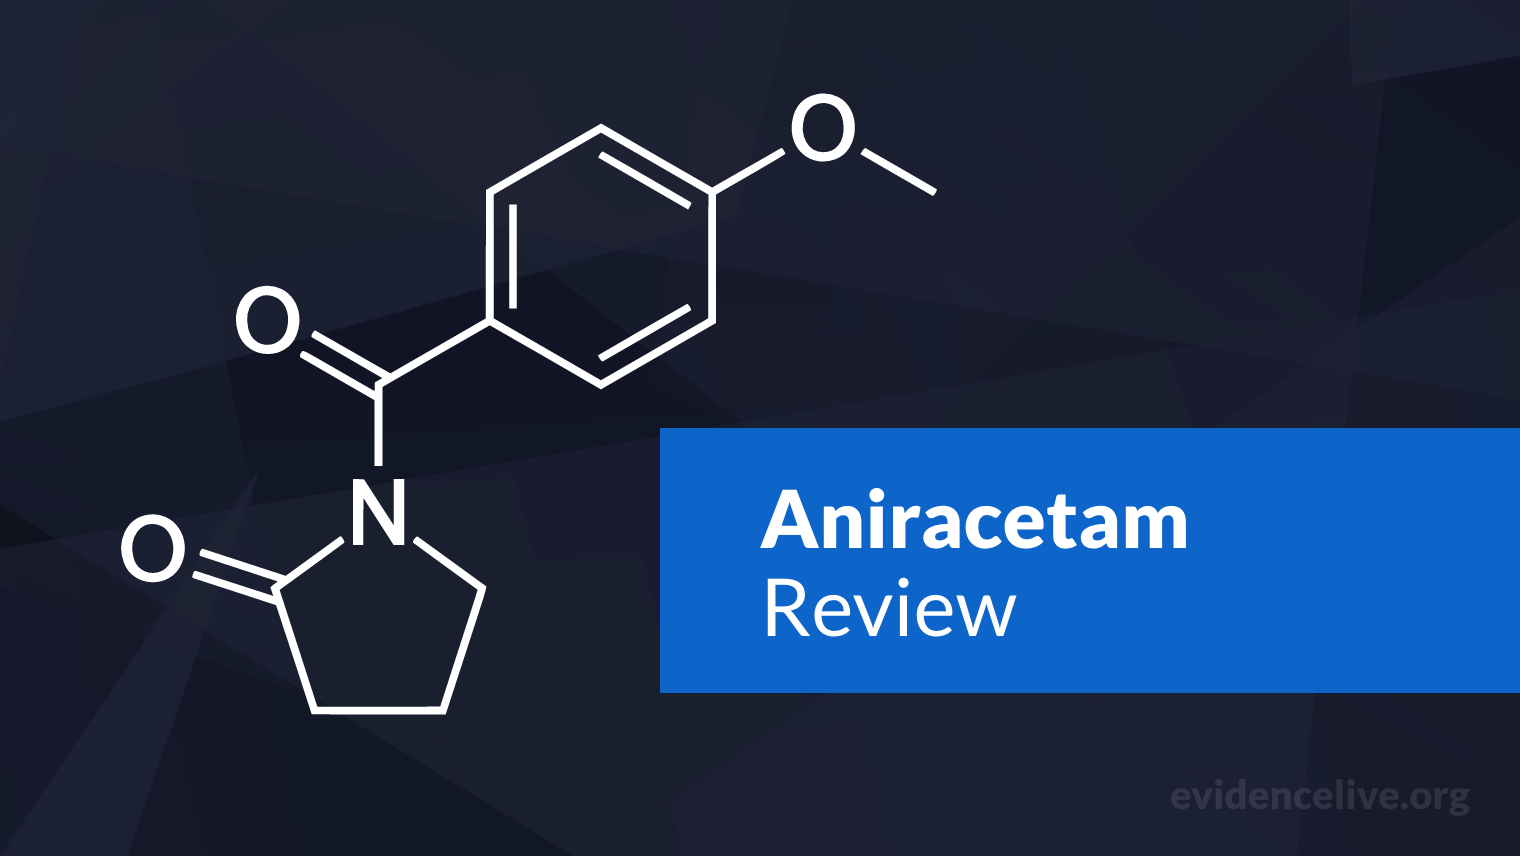 Aniracetam: Benefits, Uses, Dosage, and Side Effects